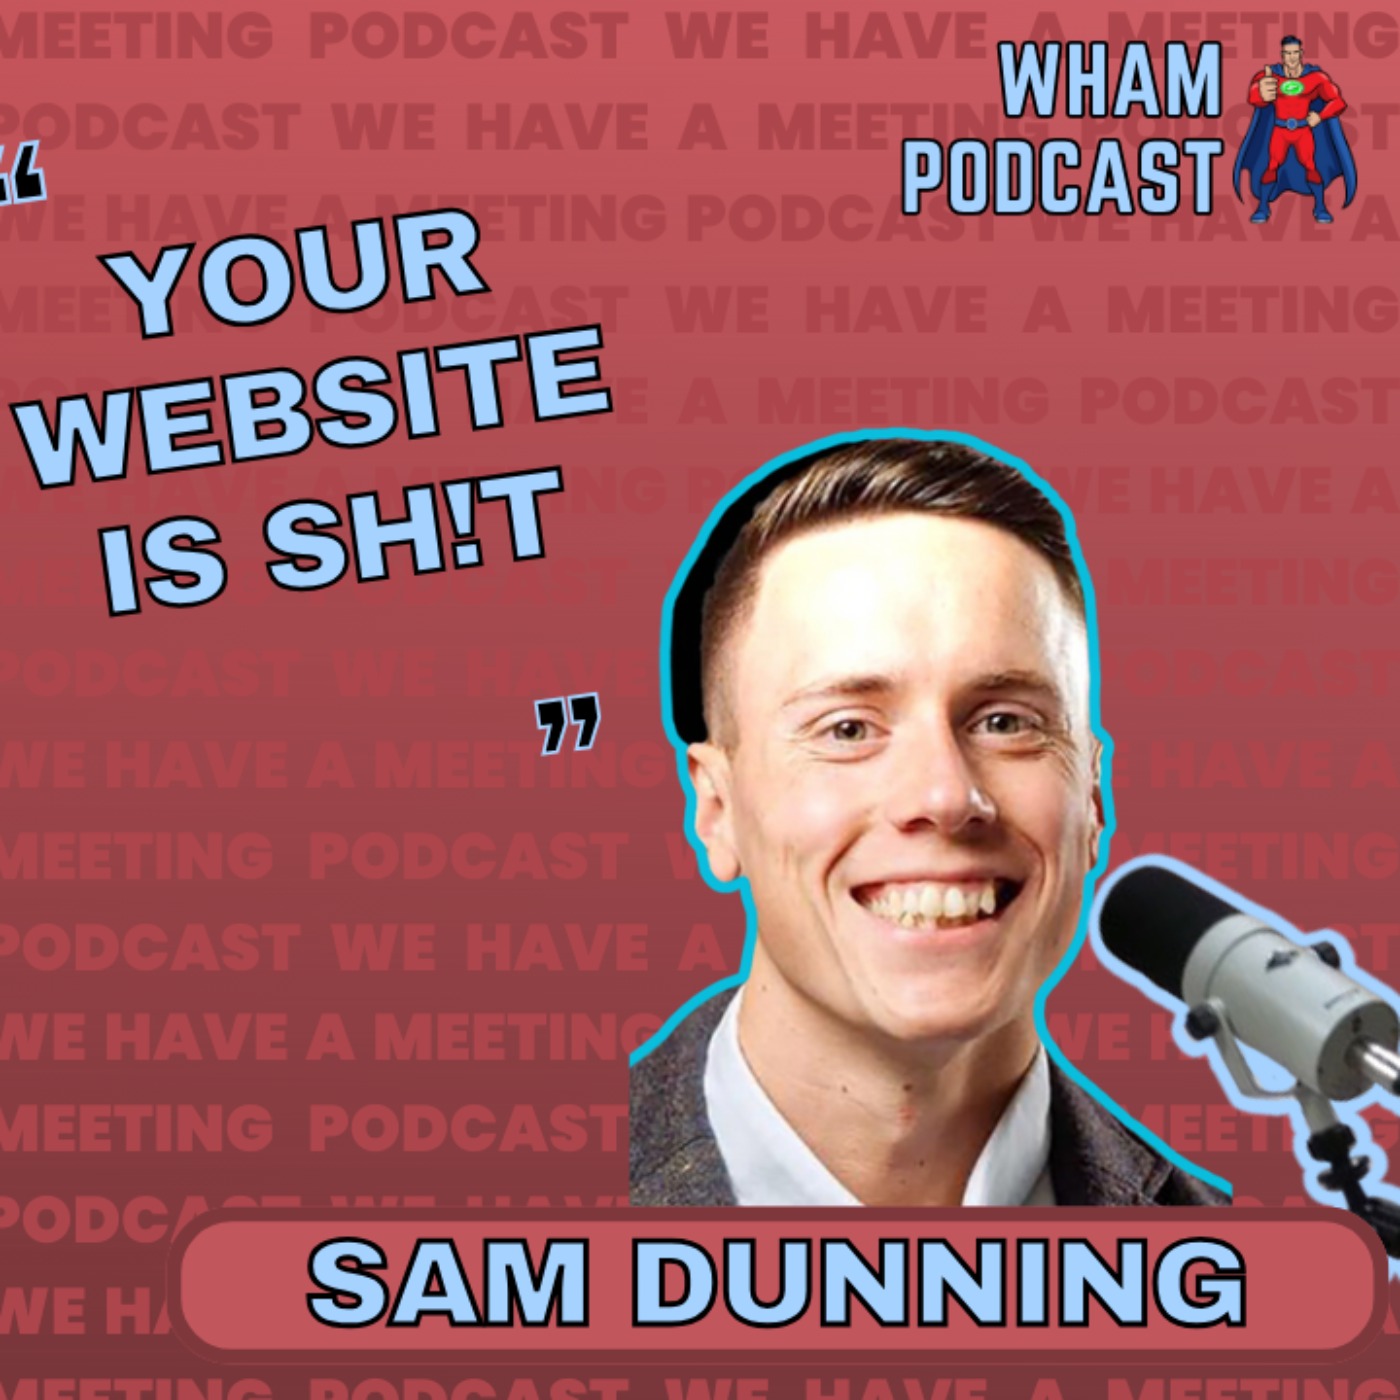 "YOUR WEBSITE IS SH!T & HOW TO FIX IT - Ep 101 Sam Dunning